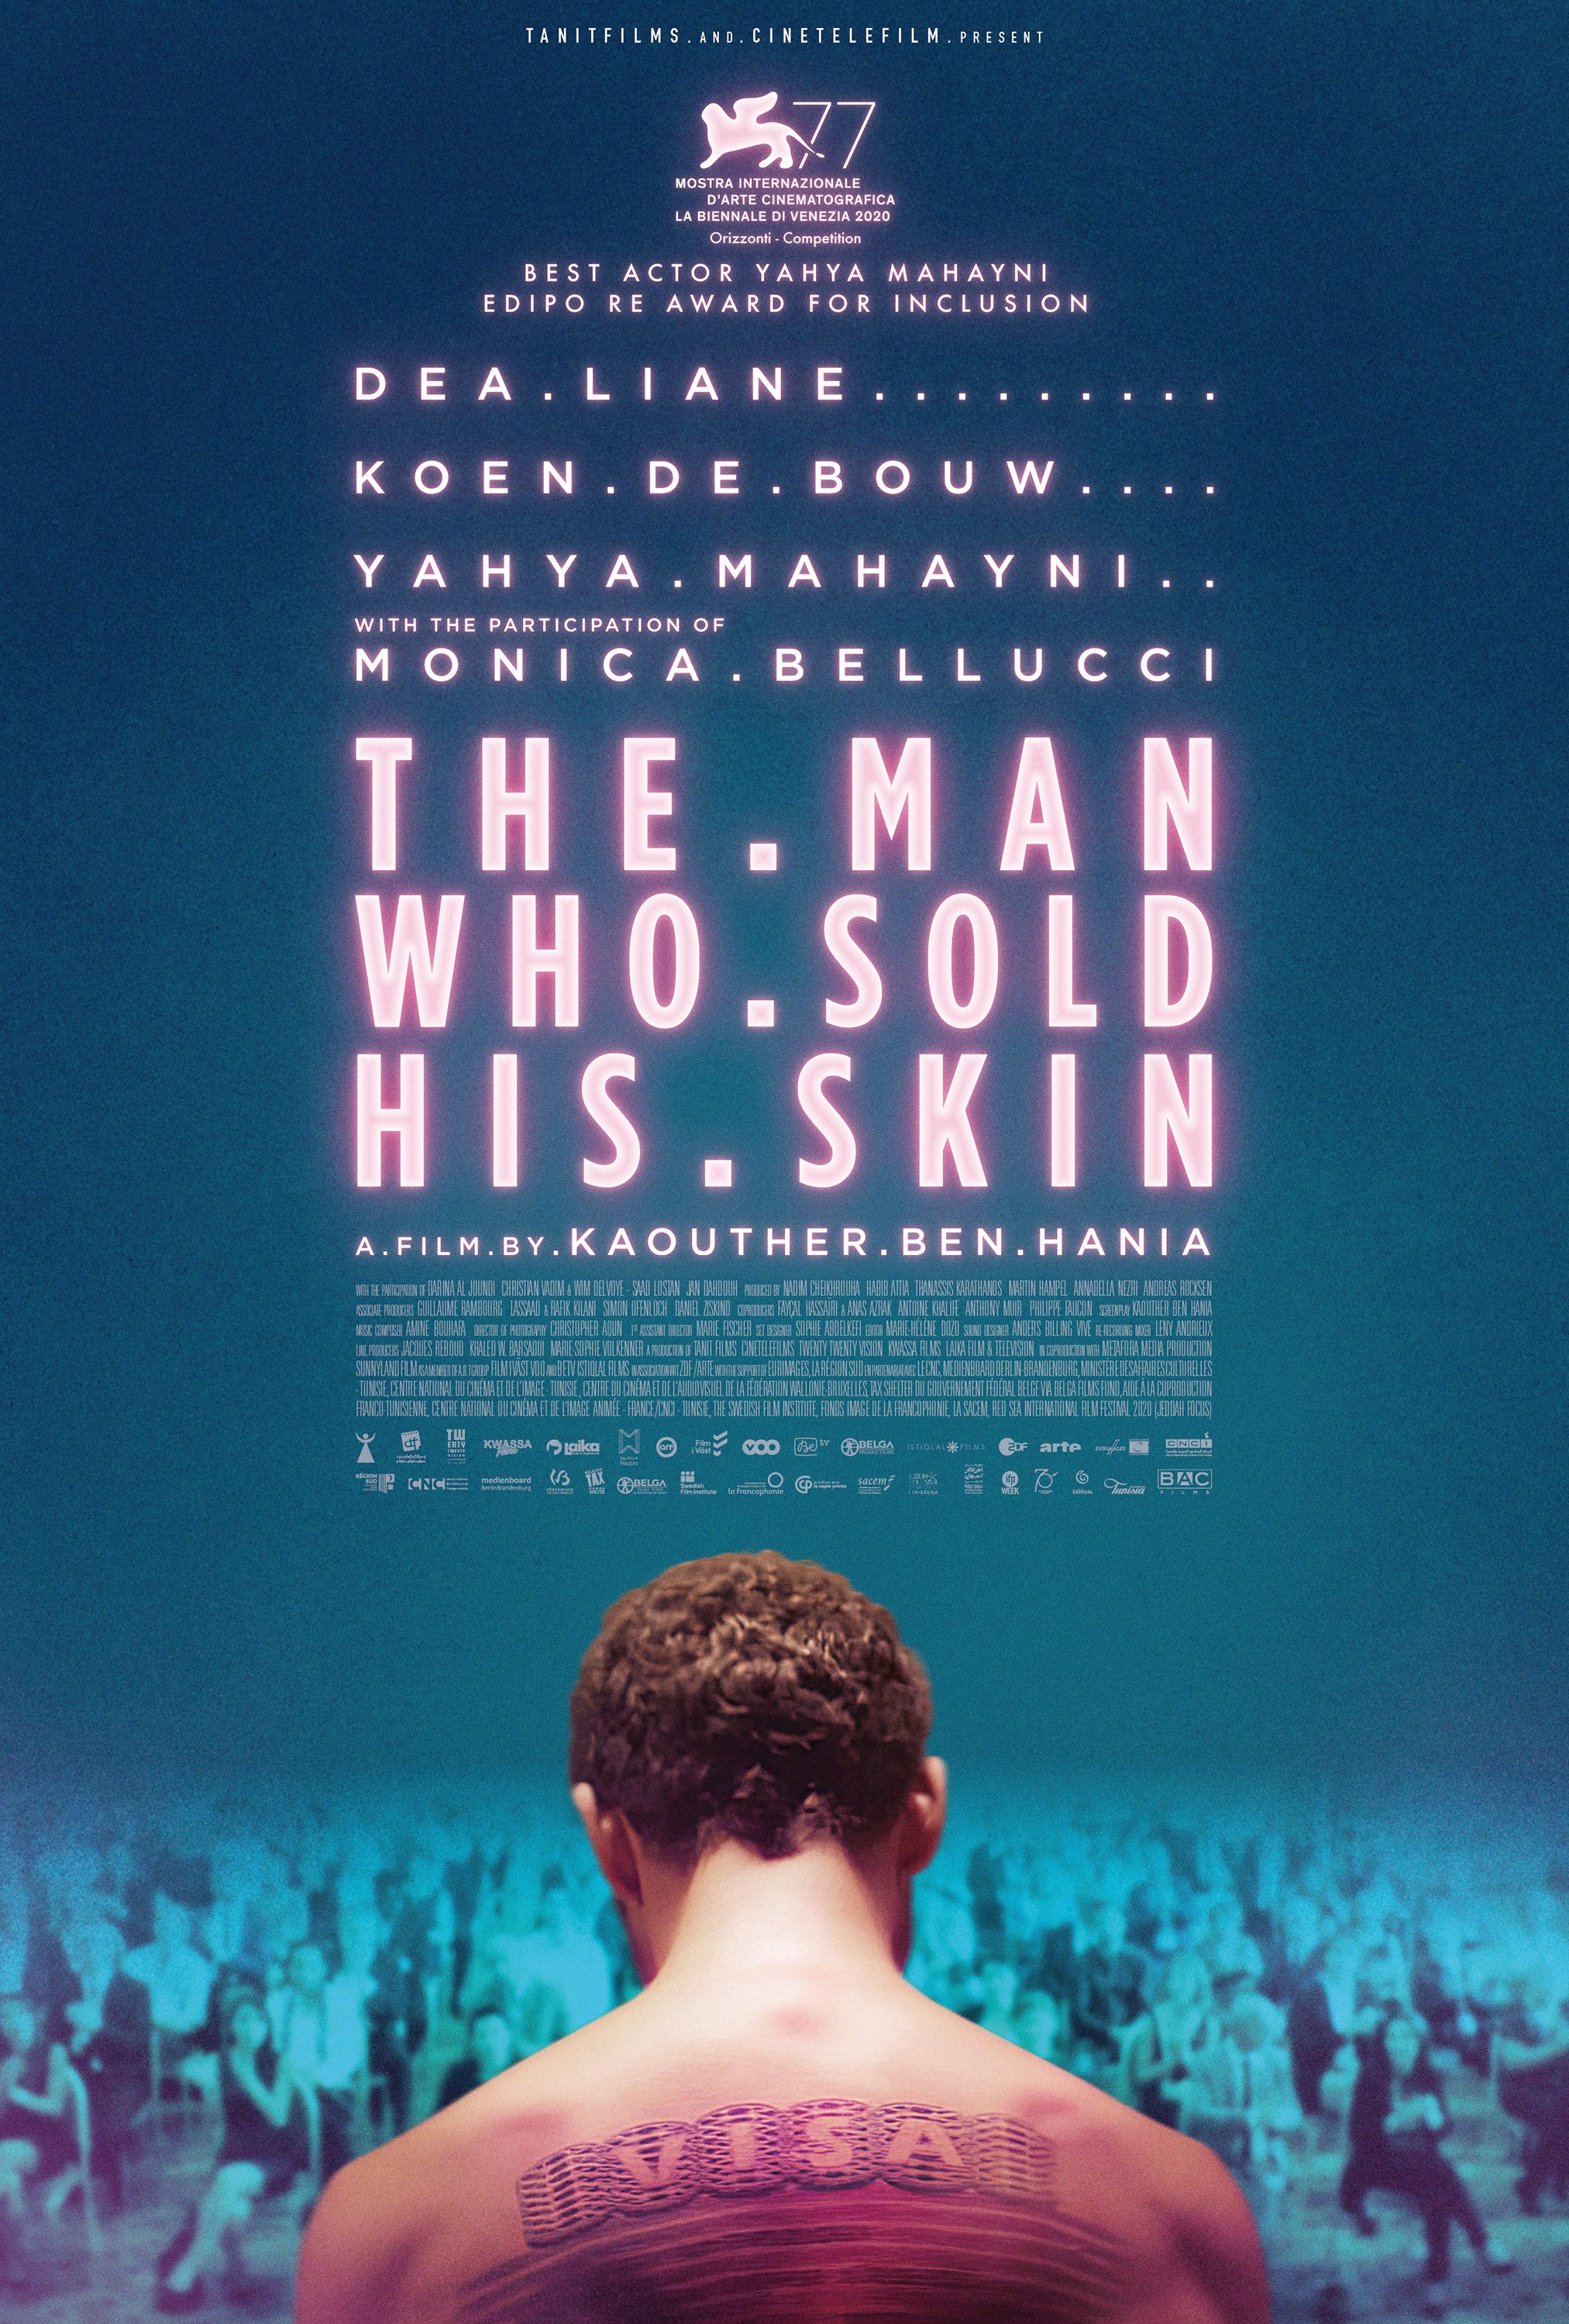 The Man Who Sold His Skin movie poster